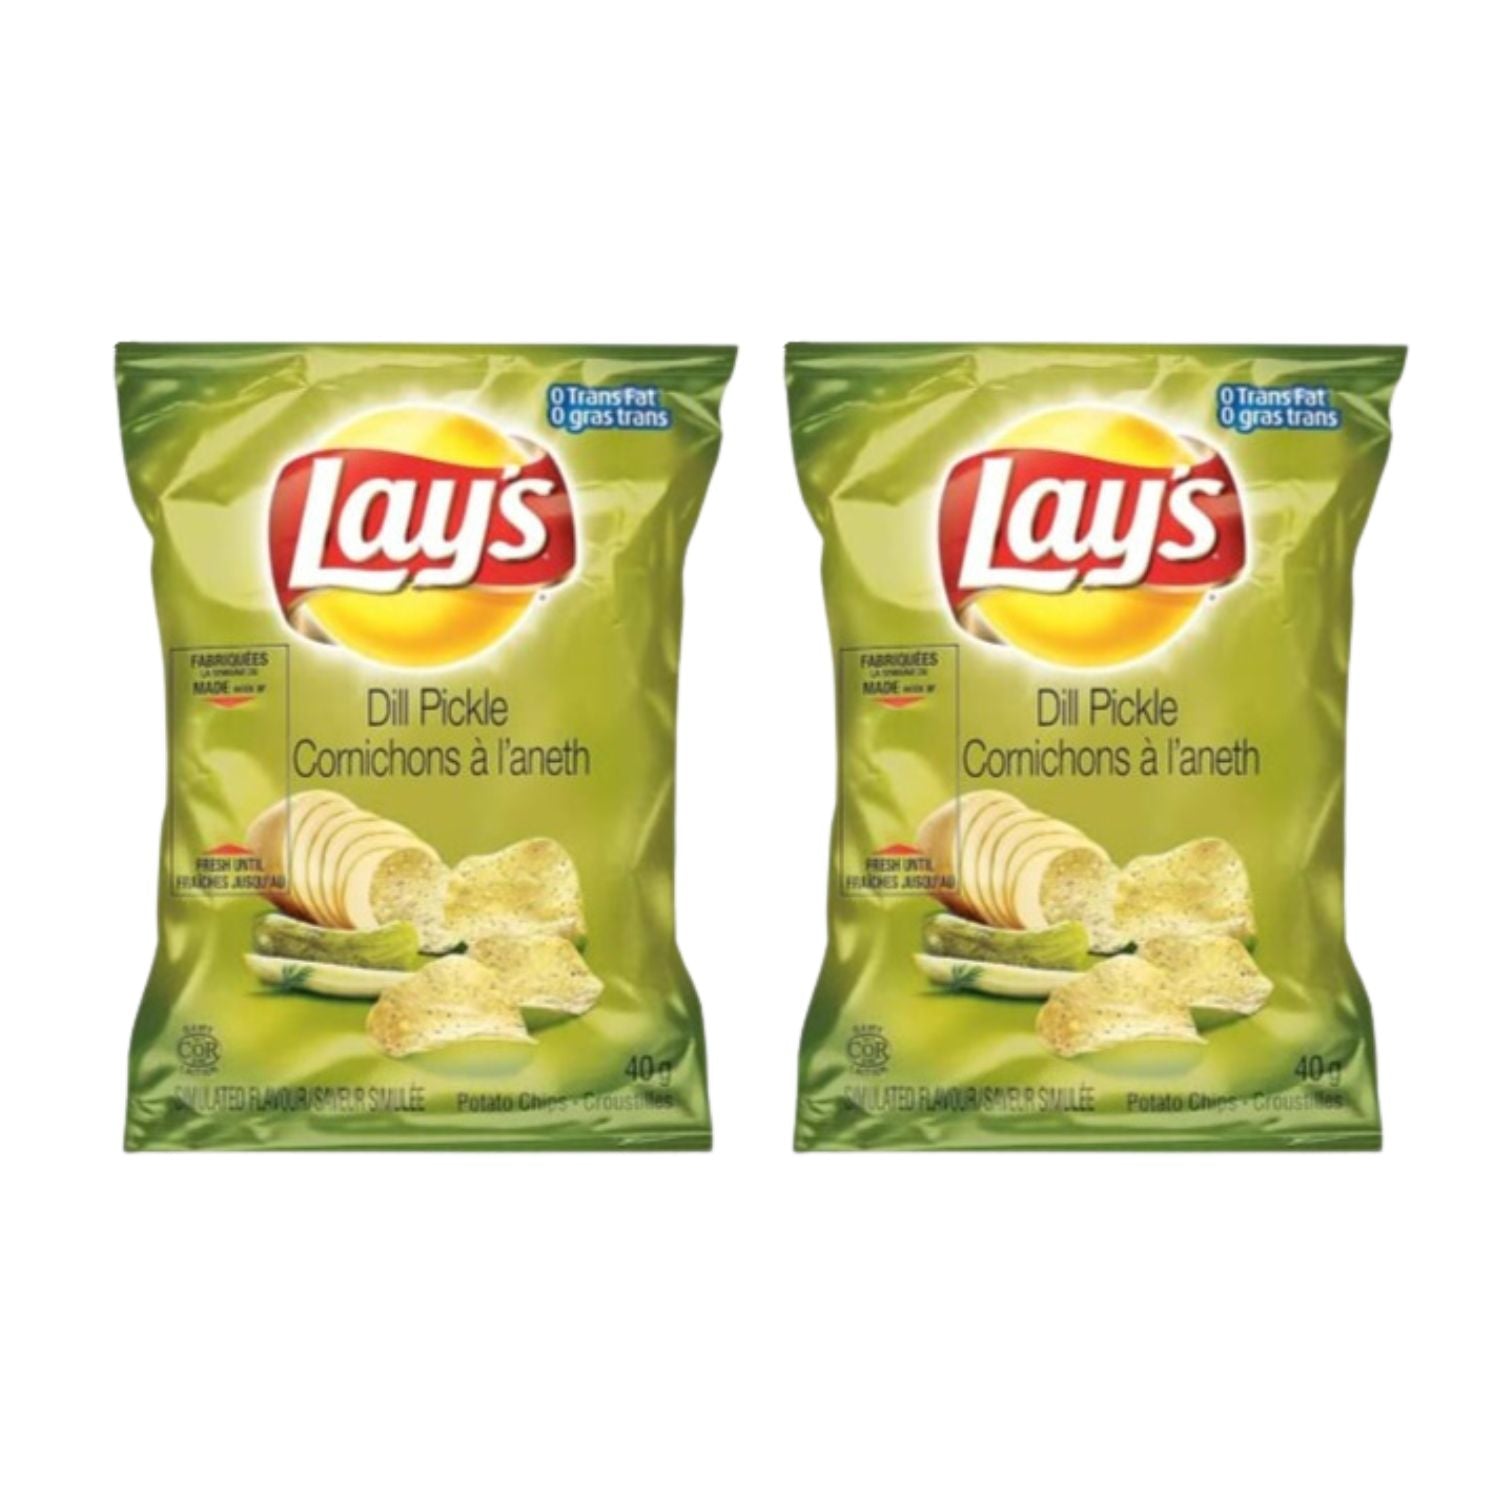 Lays Dill Pickle Potato Chips Snack Bag pack of 2